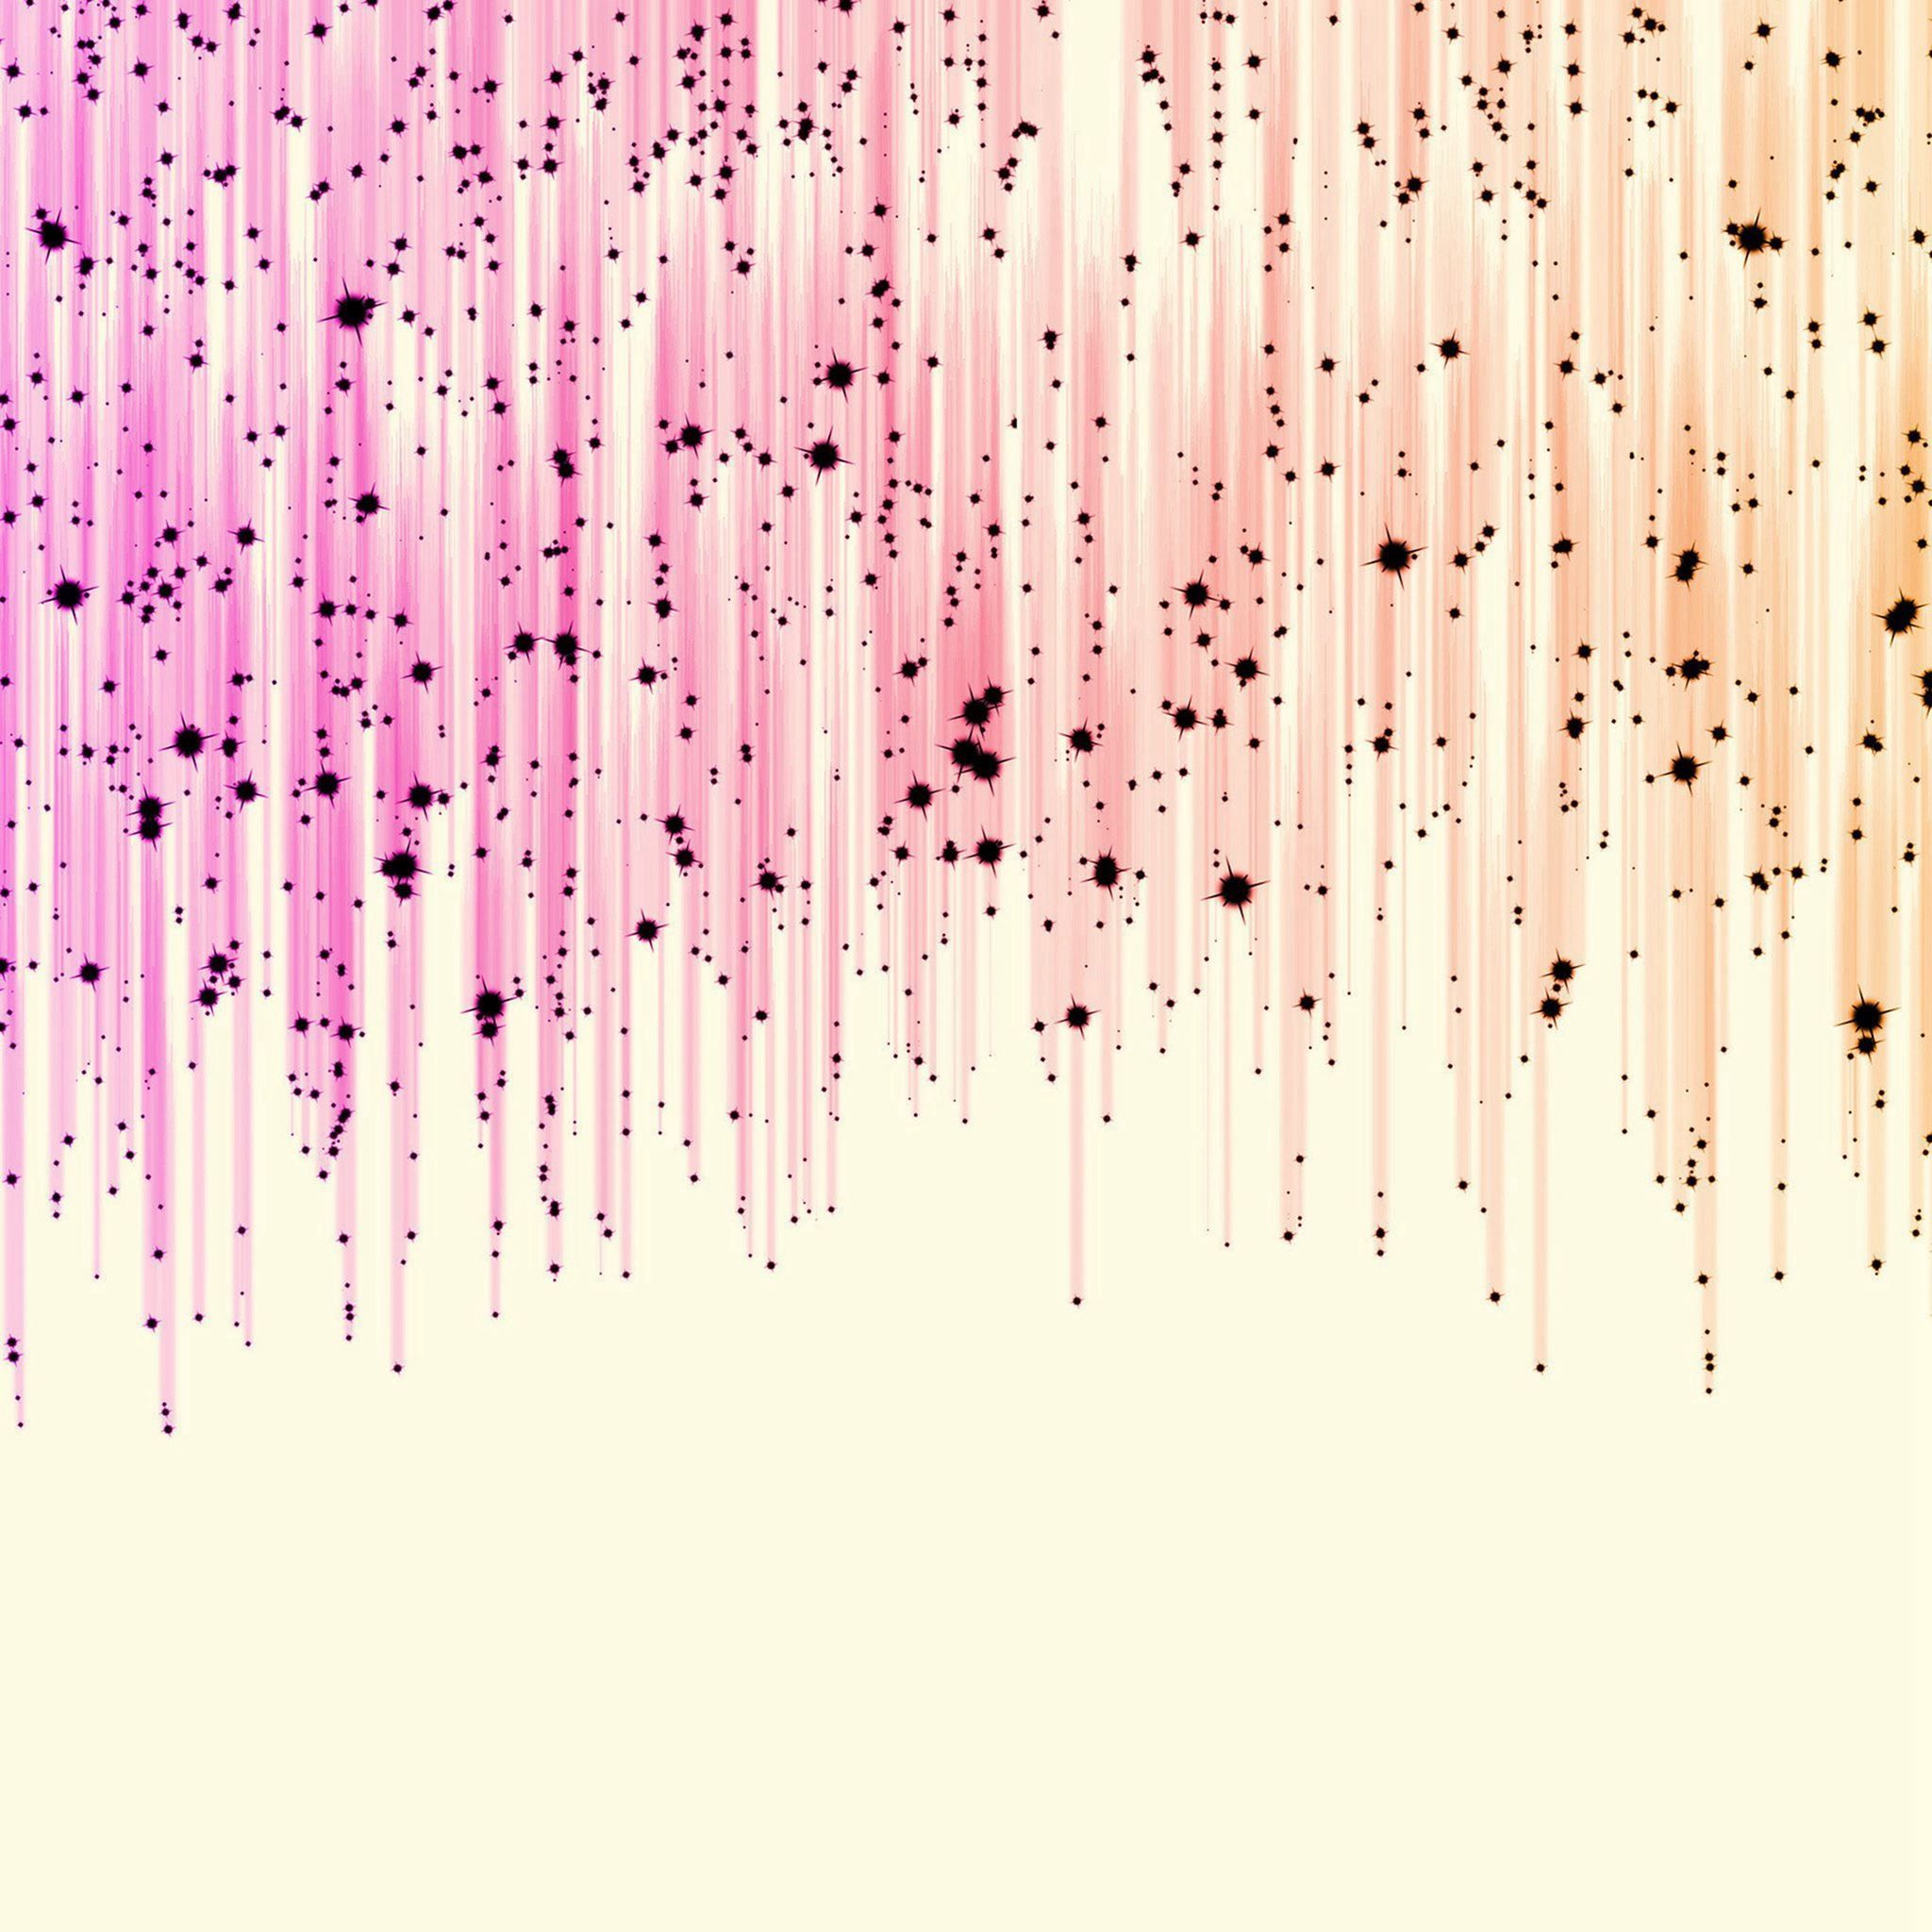 A digital painting of a pink and orange striped background with black dots. - Pattern